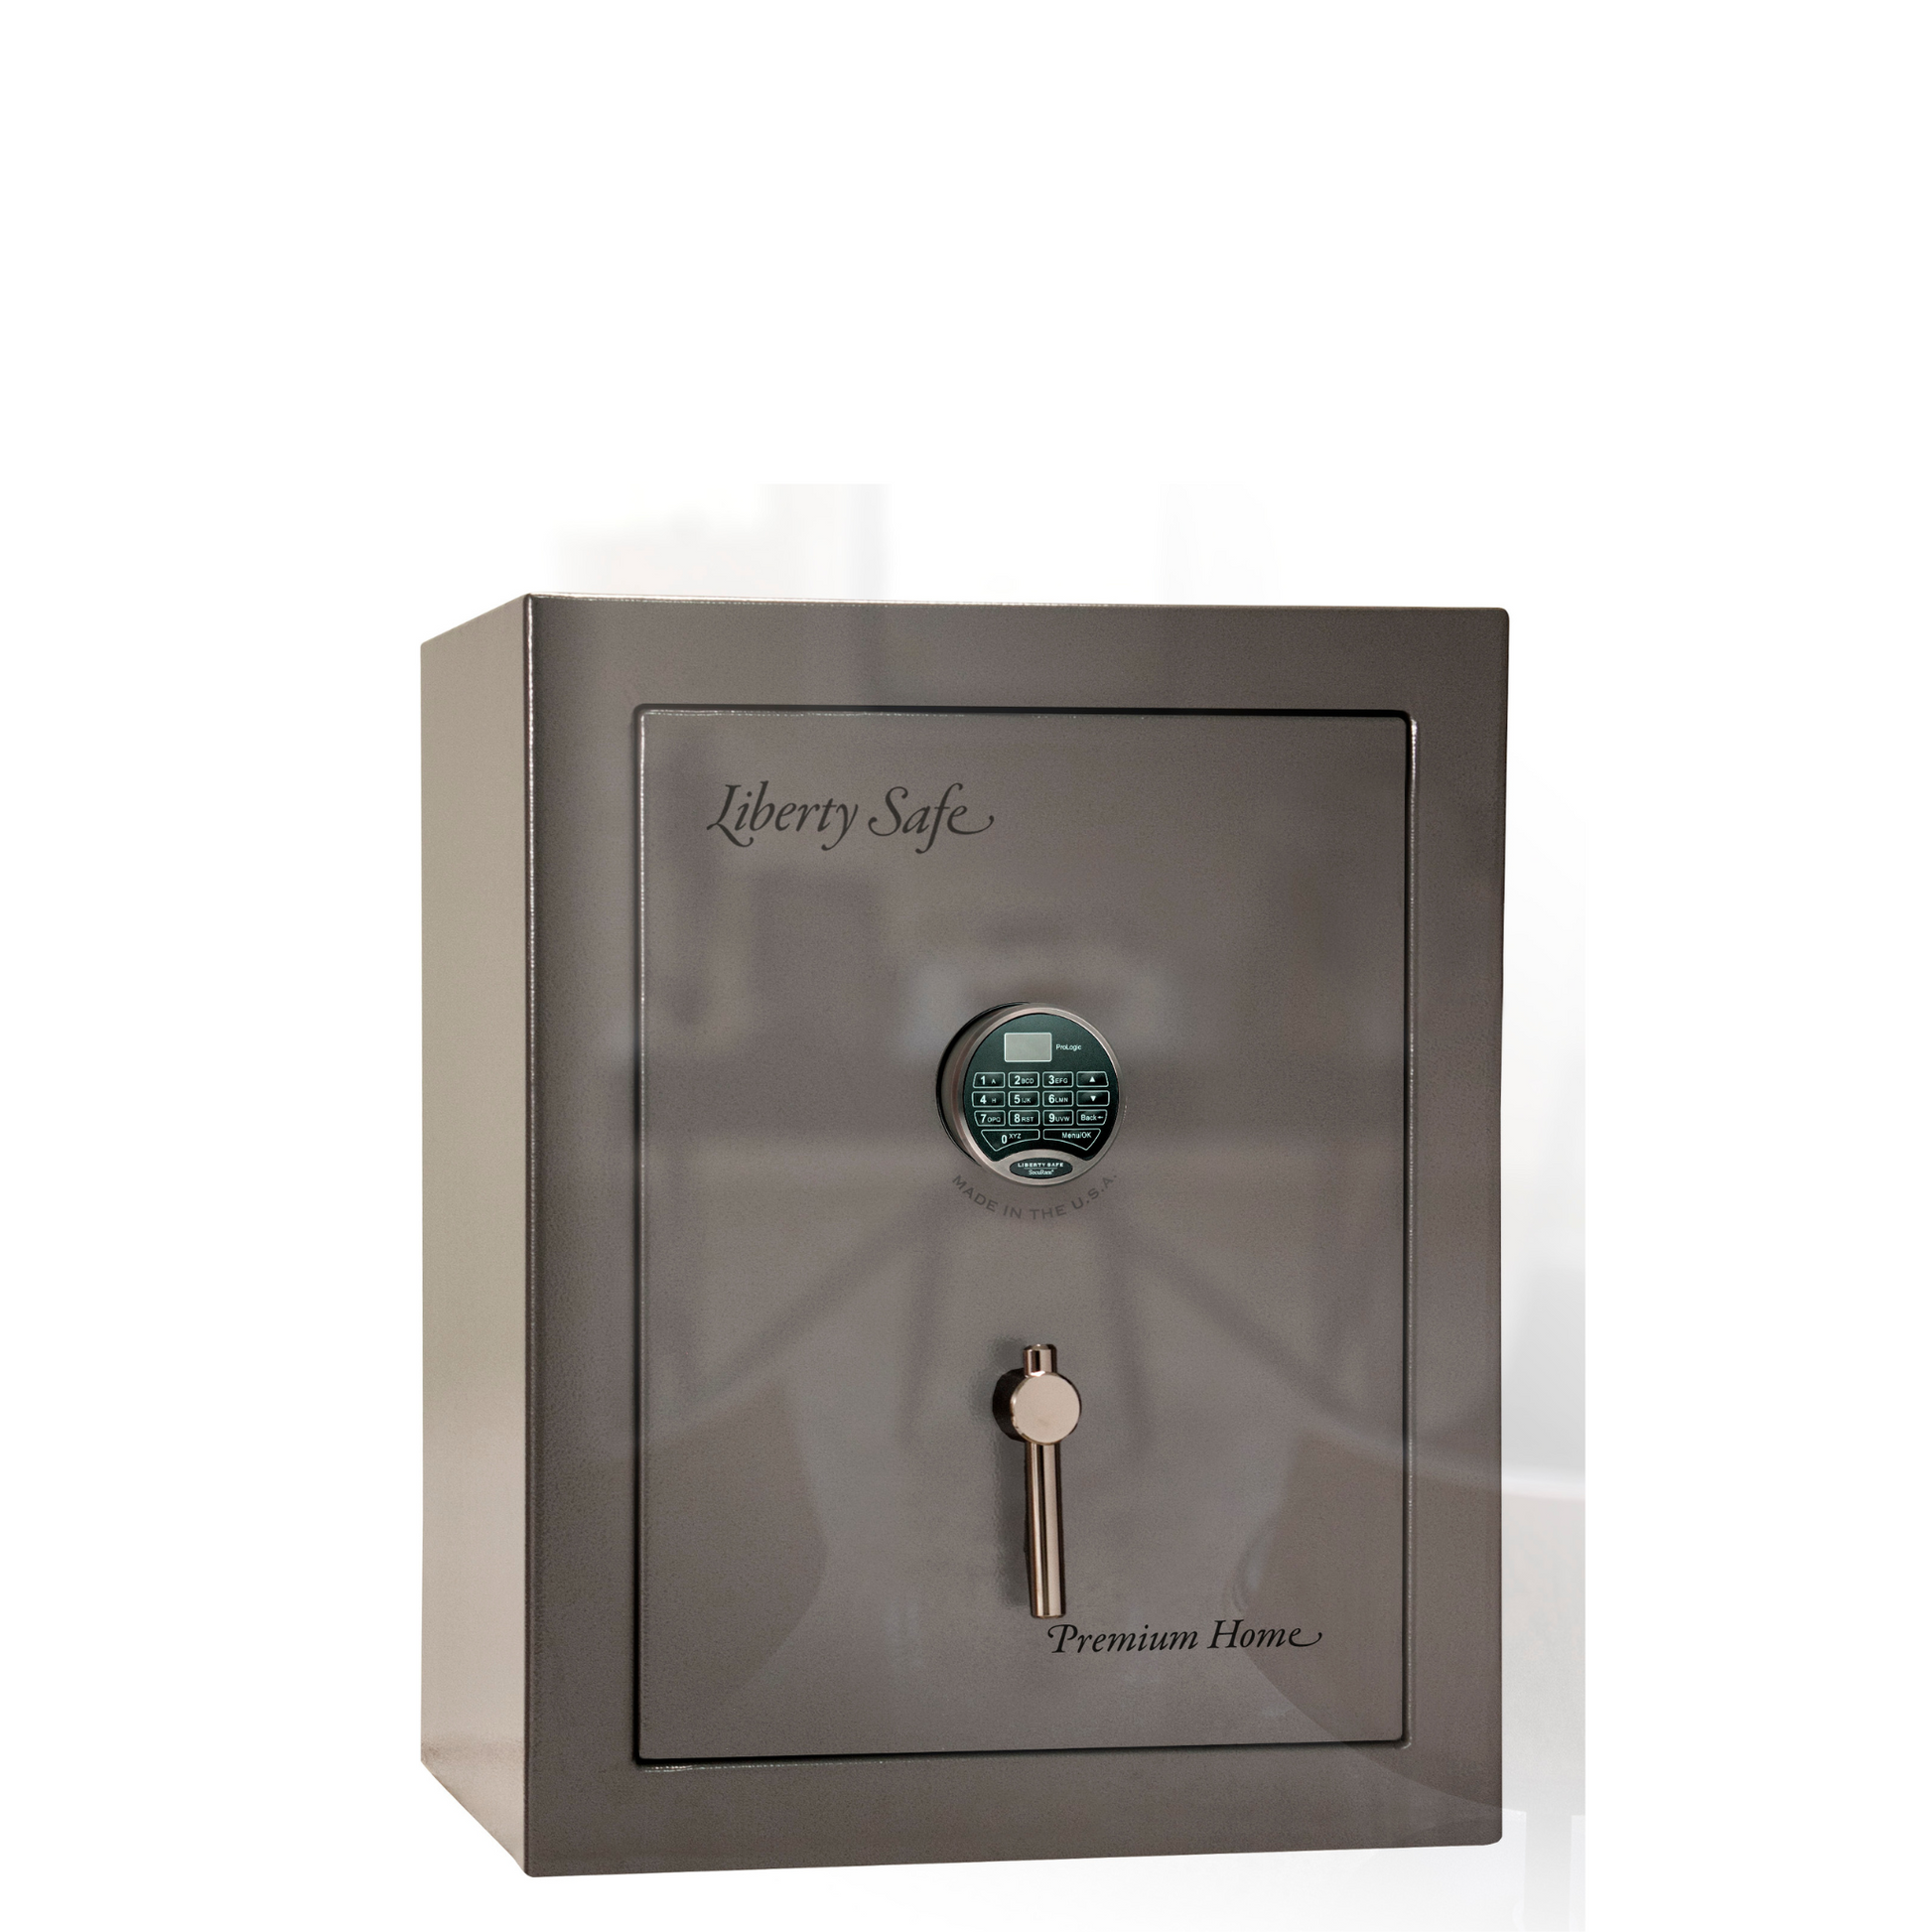 Premium Home Series | Level 7 Security | 2 Hour Fire Protection | 08 | Dimensions: 29.75"(H) x 24.5"(W) x 19"(D) | Champagne Gloss - Closed Door